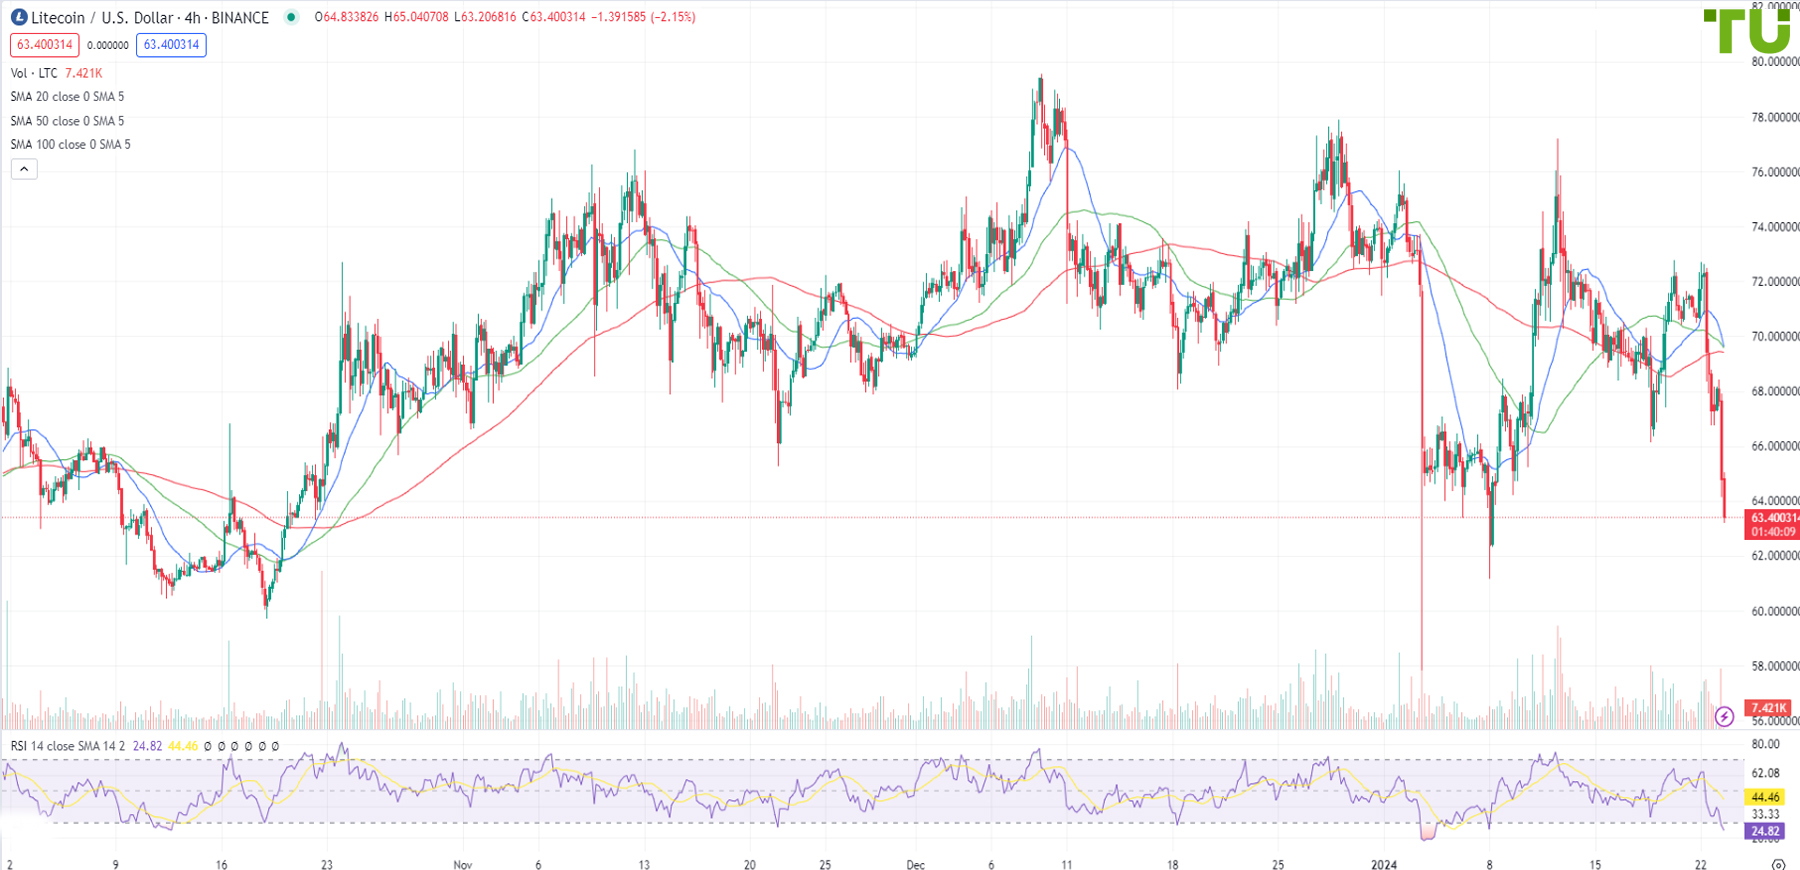 LTC/USD continued to decline